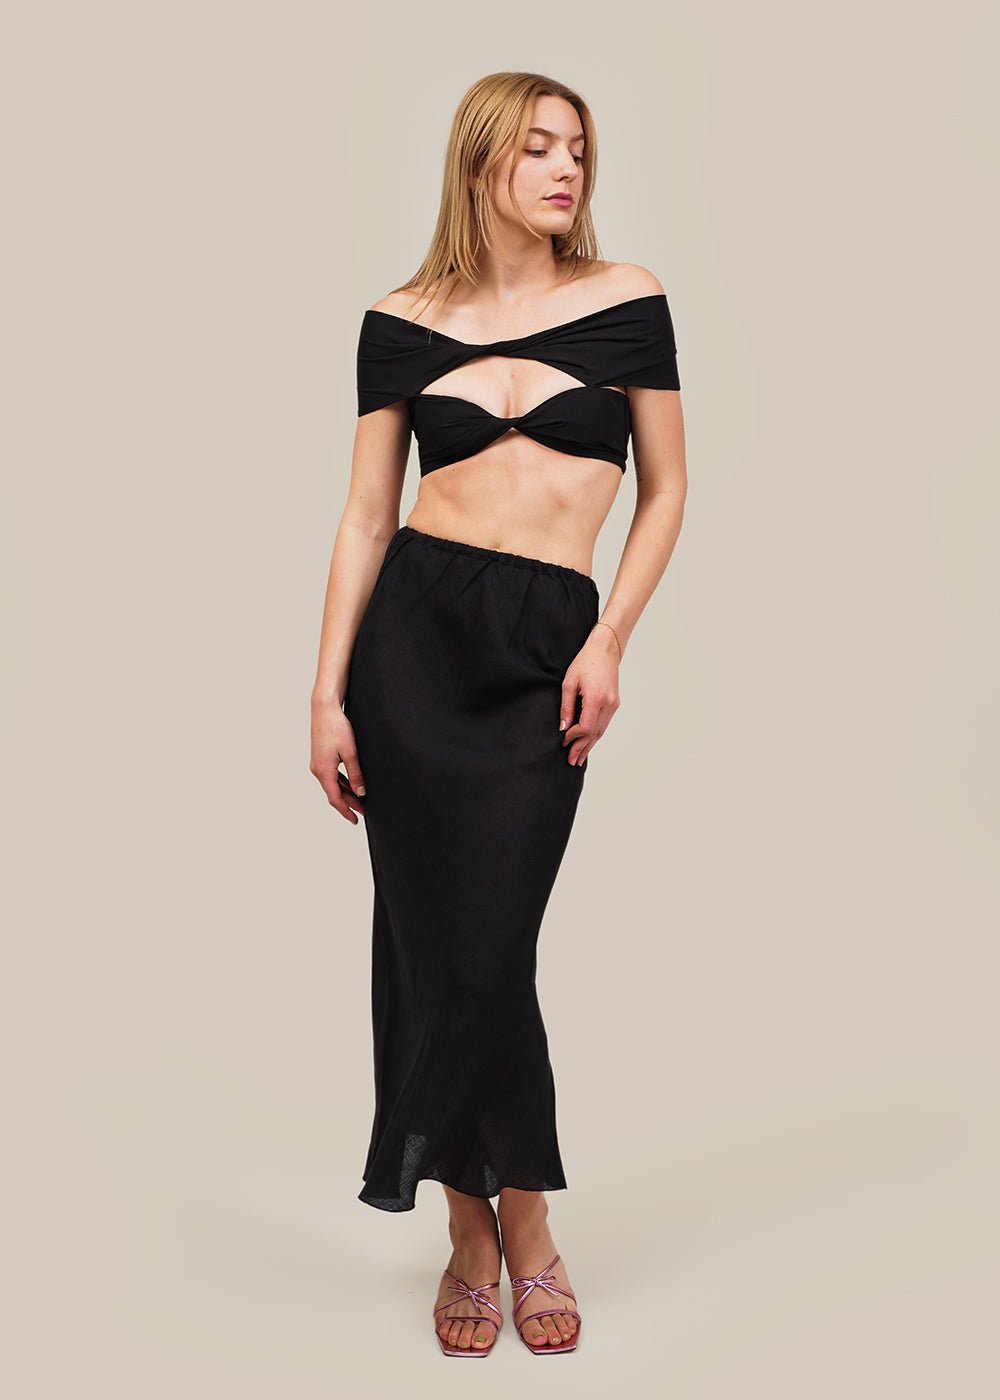 Modern Weaving Black Double Bandeau Top - New Classics Studios Sustainable Ethical Fashion Canada